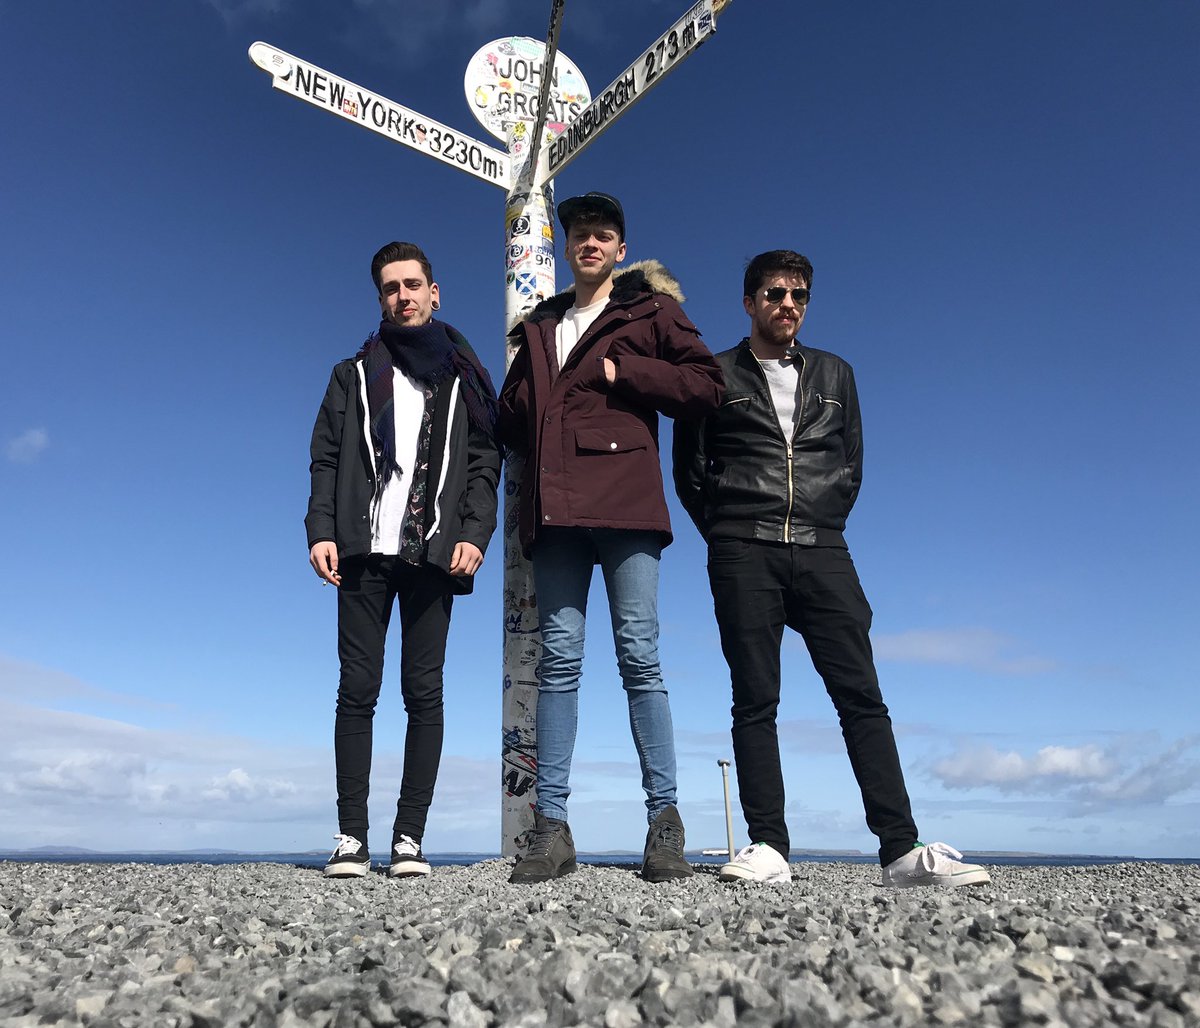 Made a quick trip to the end of the world to absorb that sea energy before tonight’s show at Marketbar Inverness. We hope you’re as ready as we are 🤙🎤🎸🎸🥁 x